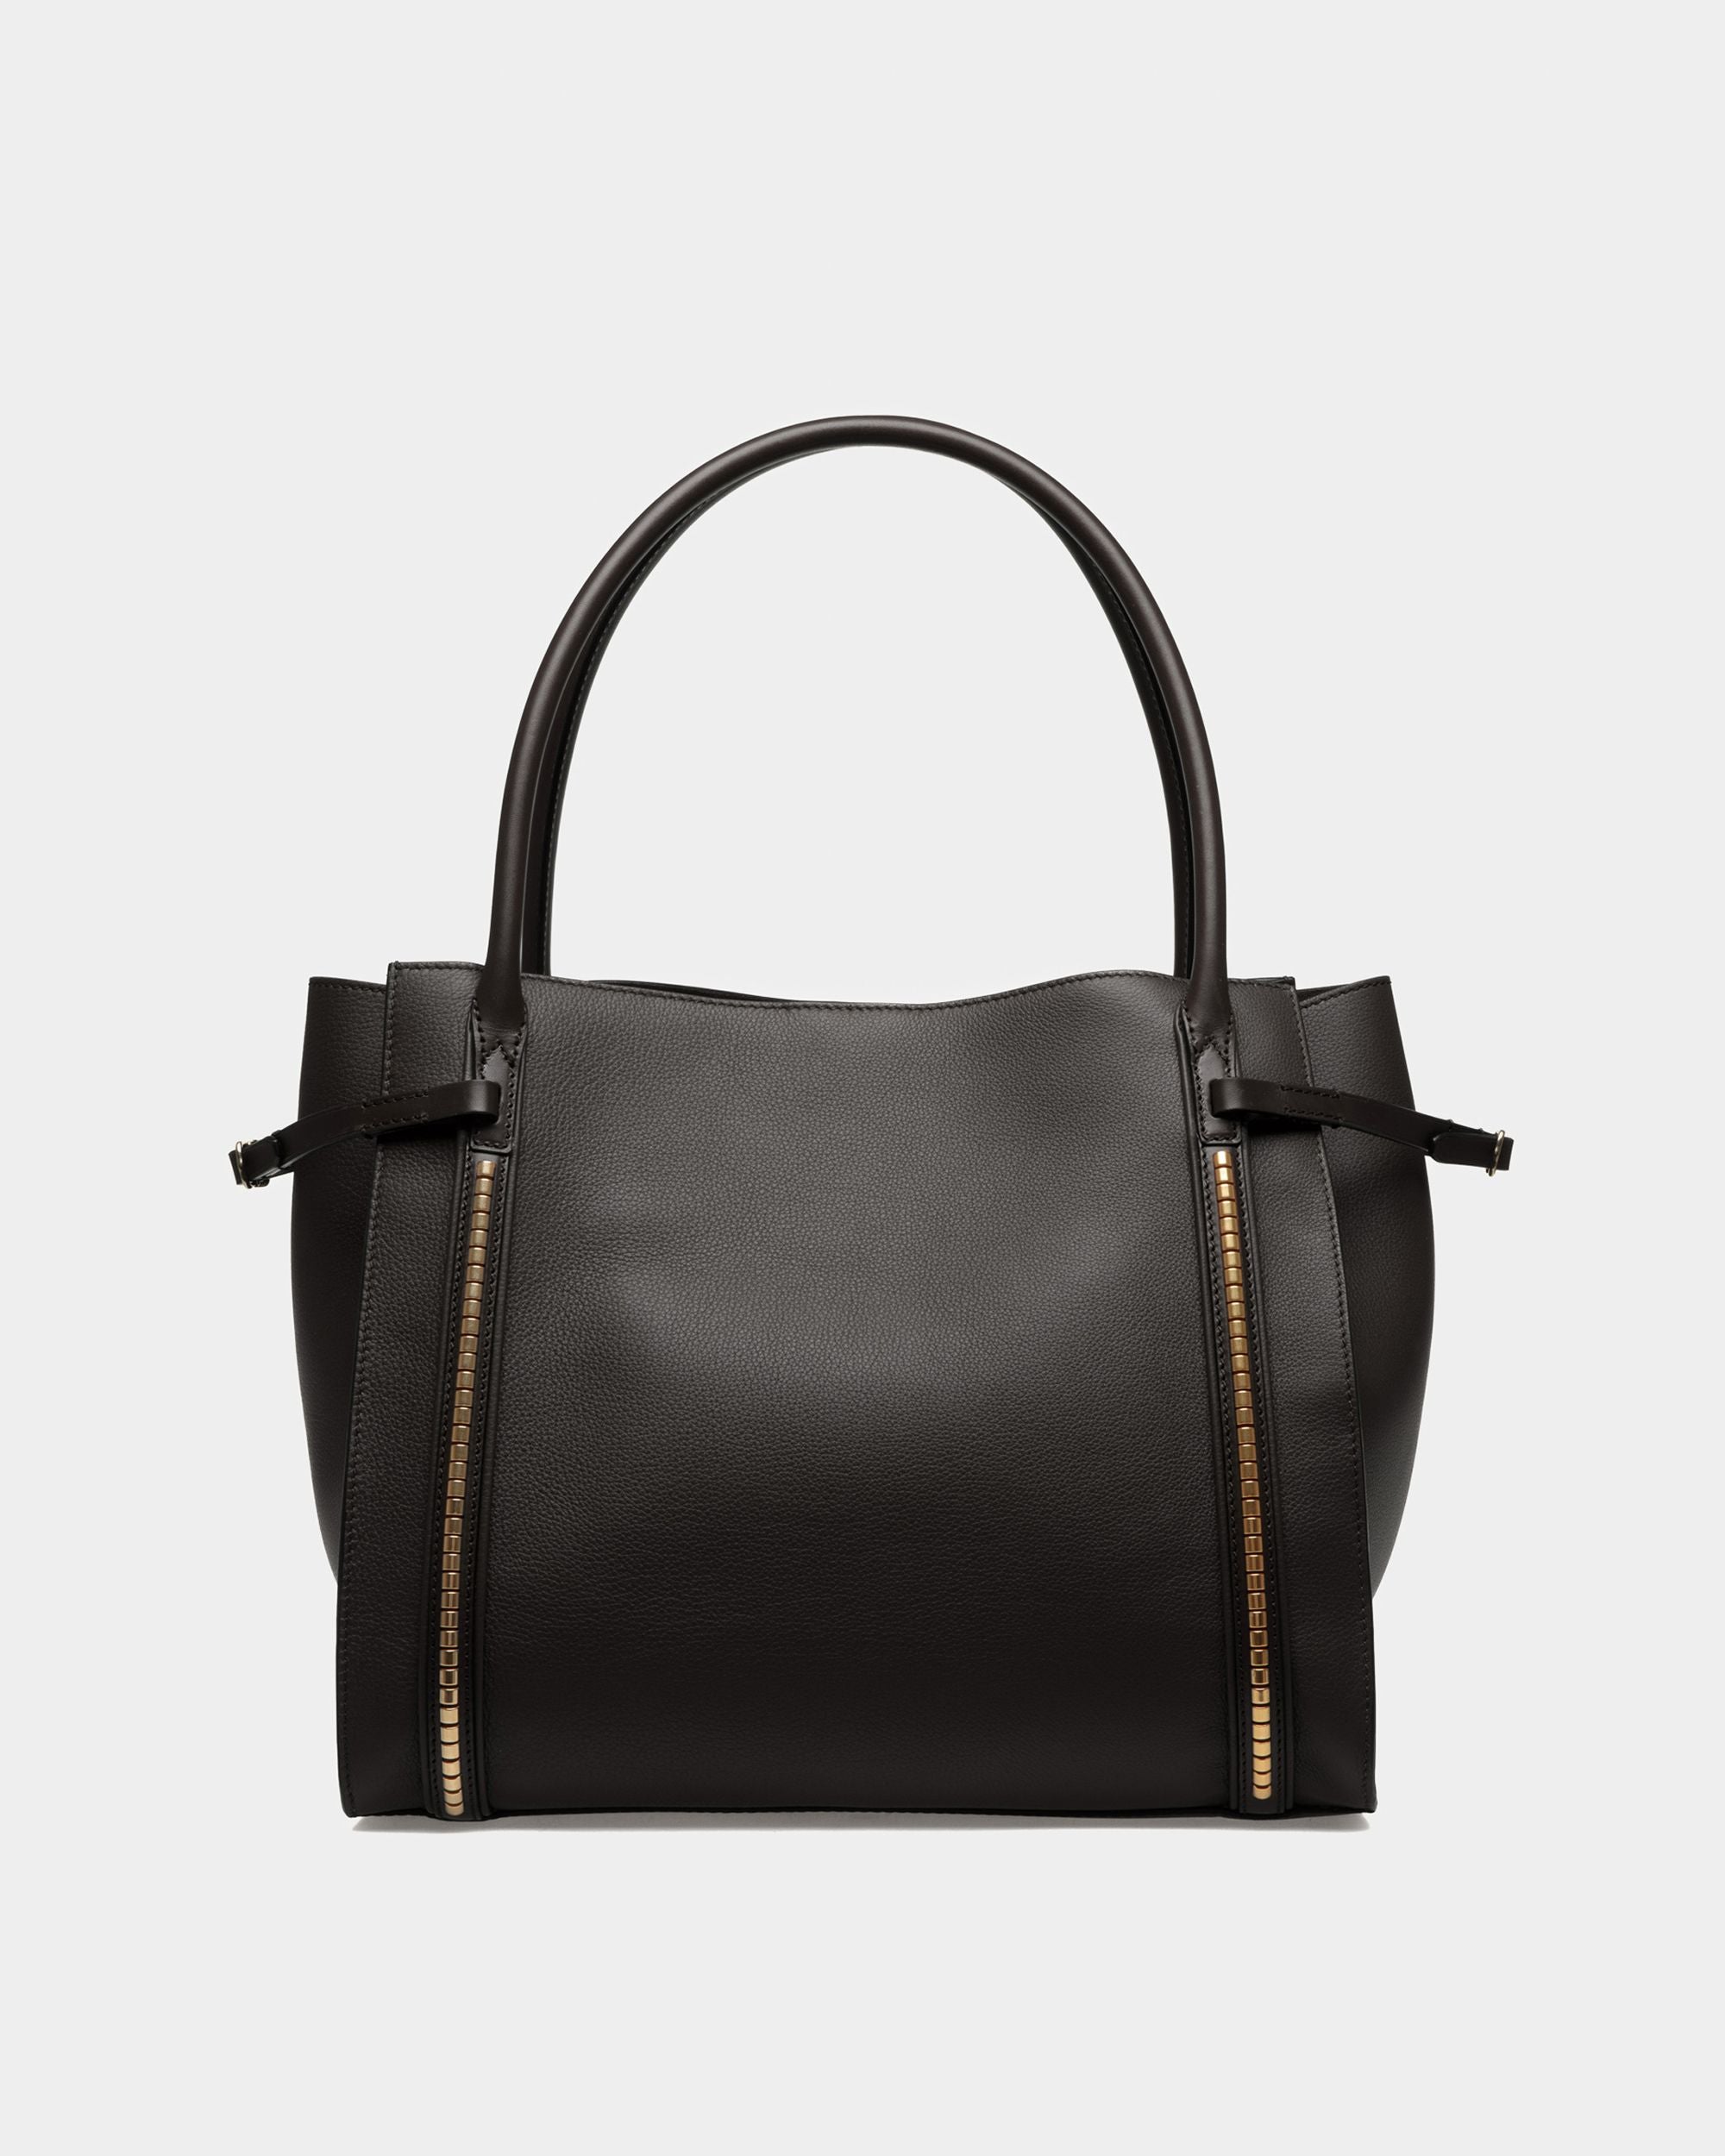 Chesney Large Tote Bag | Women's Tote | Black Leather | Bally | Still Life Back